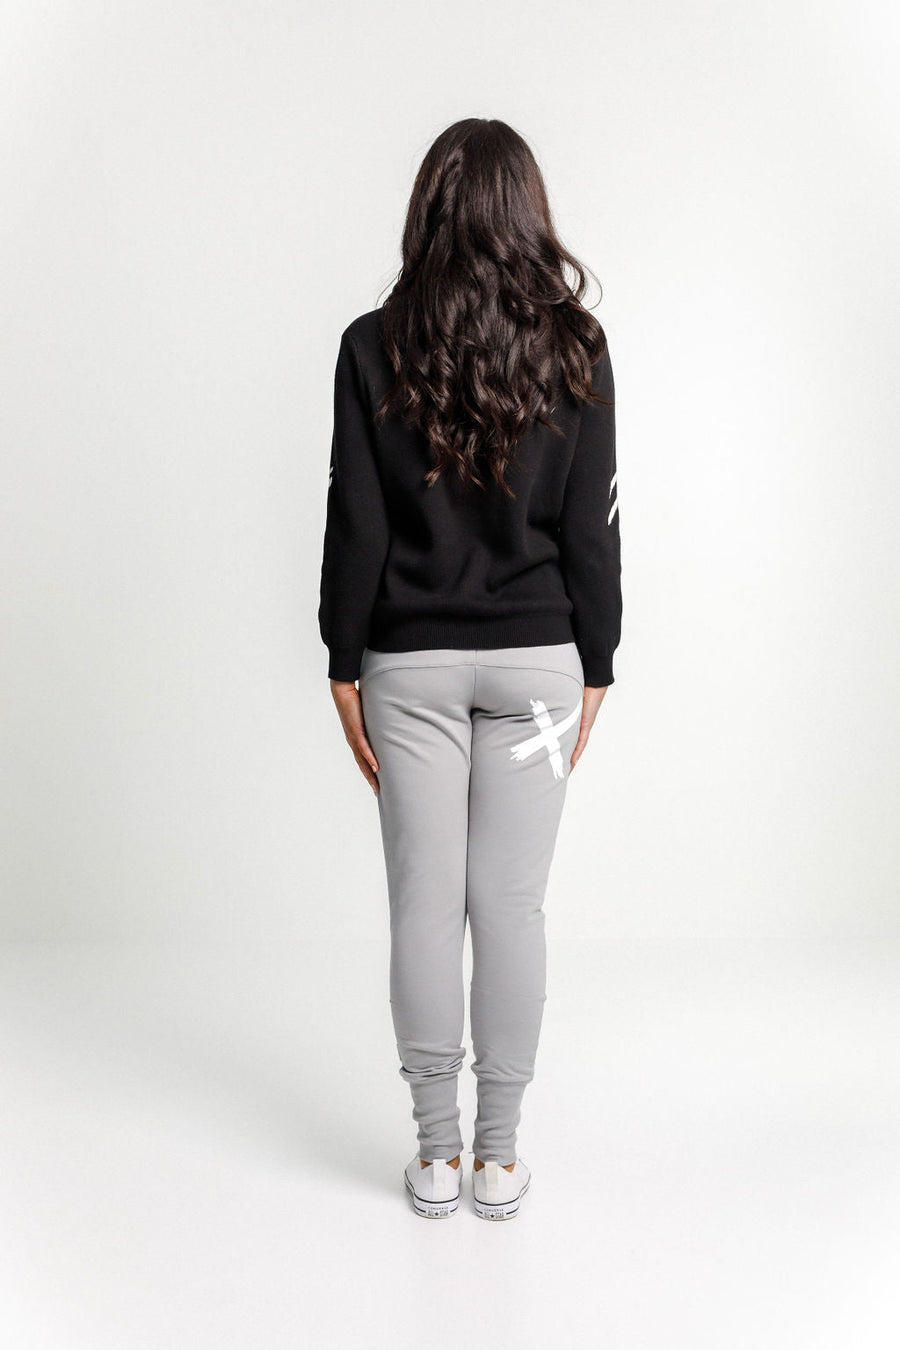 HOMELEE WINTER APARTMENT PANTS - PEWTER WHITE X